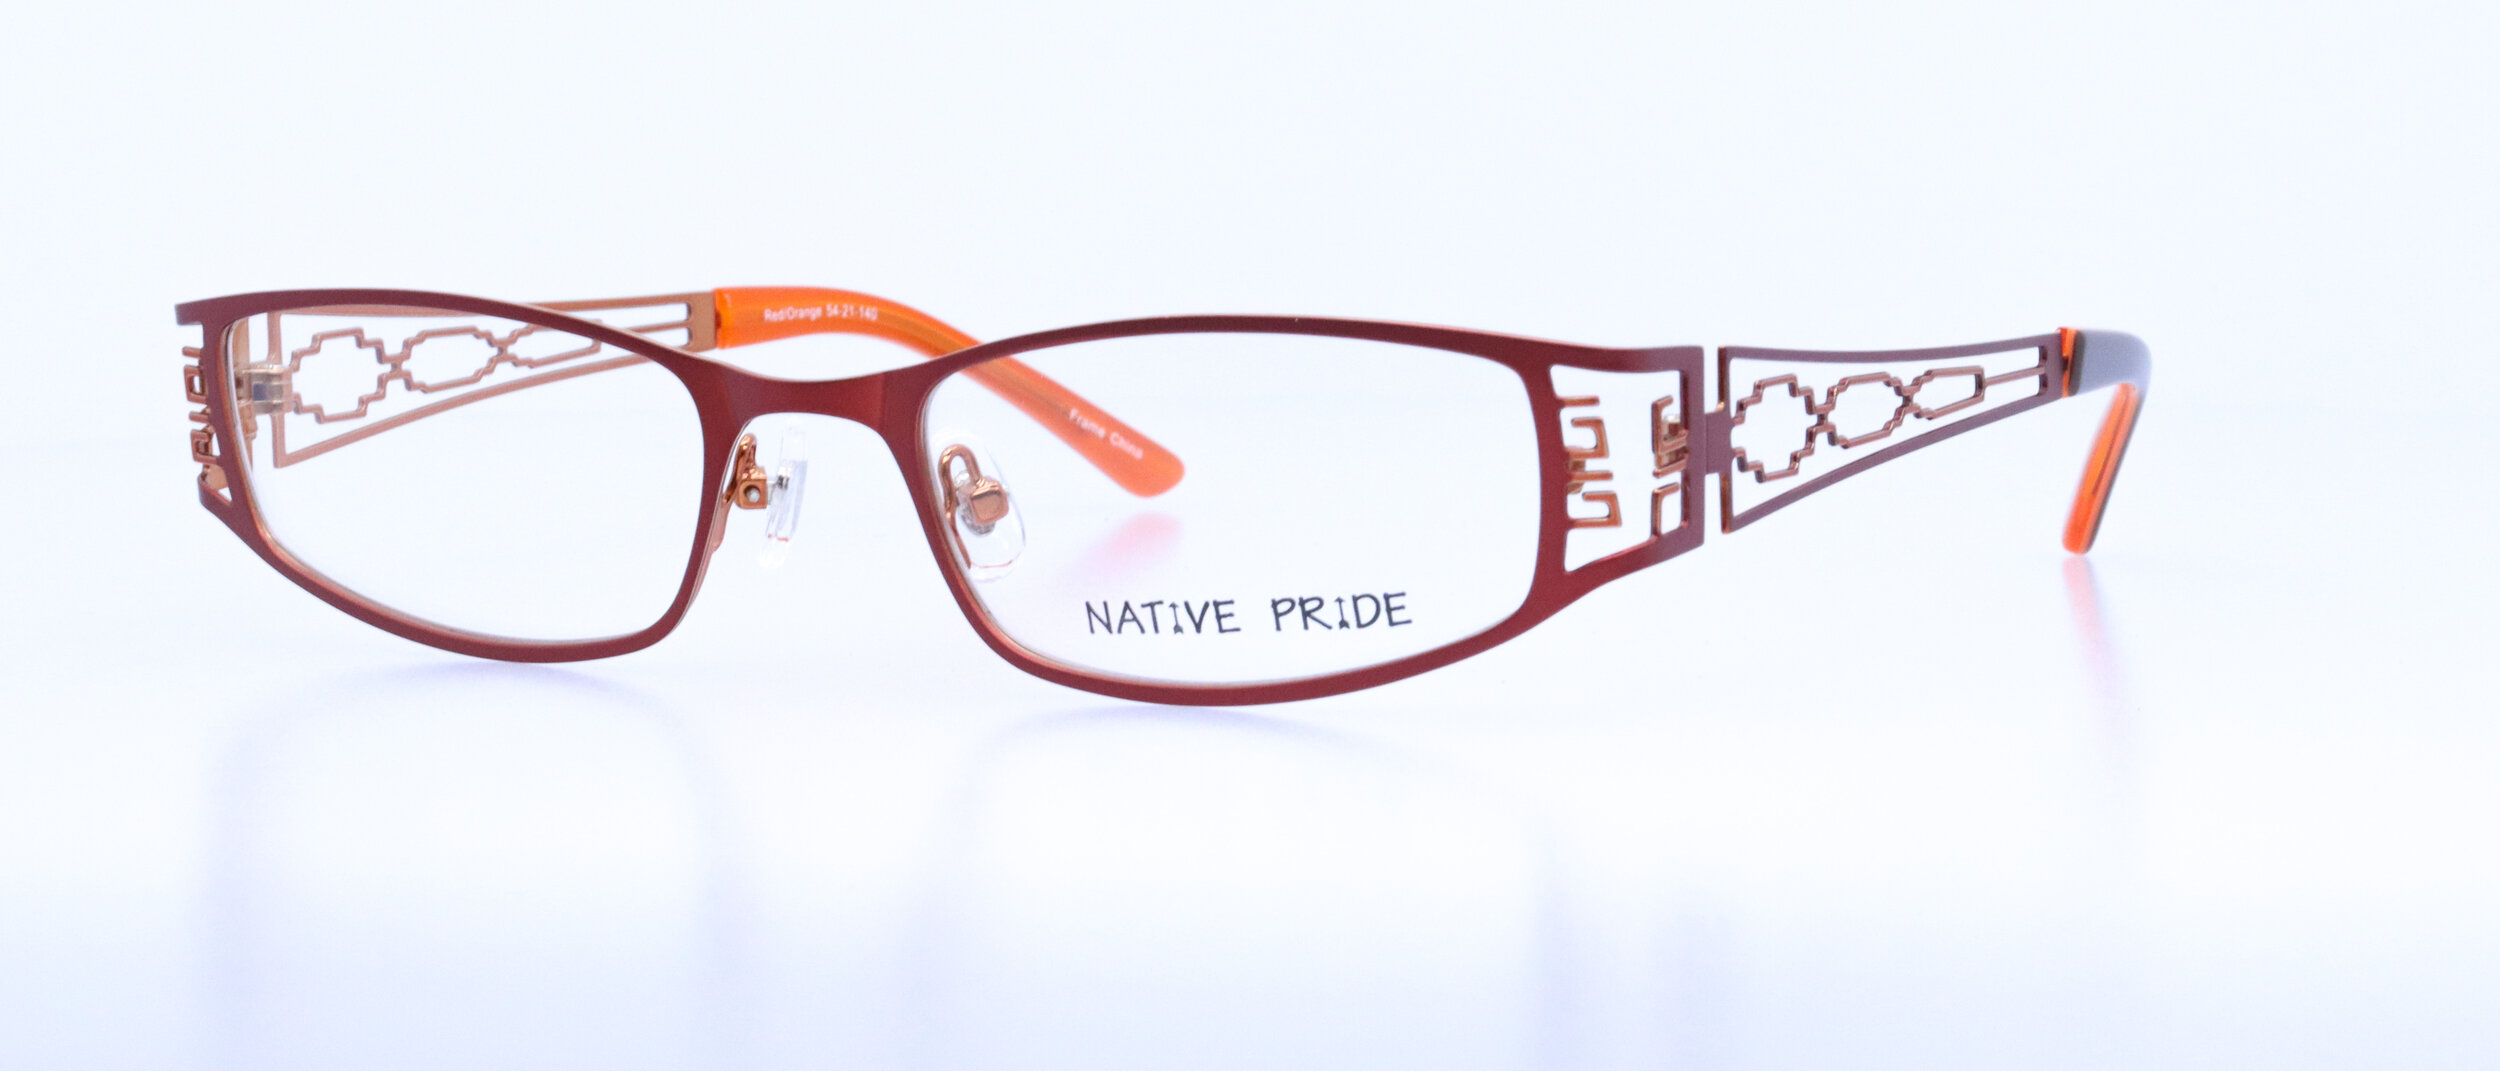  Spirit: 54-20-140, Available in Brown/Gold, Black/Red, Black/Turquoise, or Red/Orange 